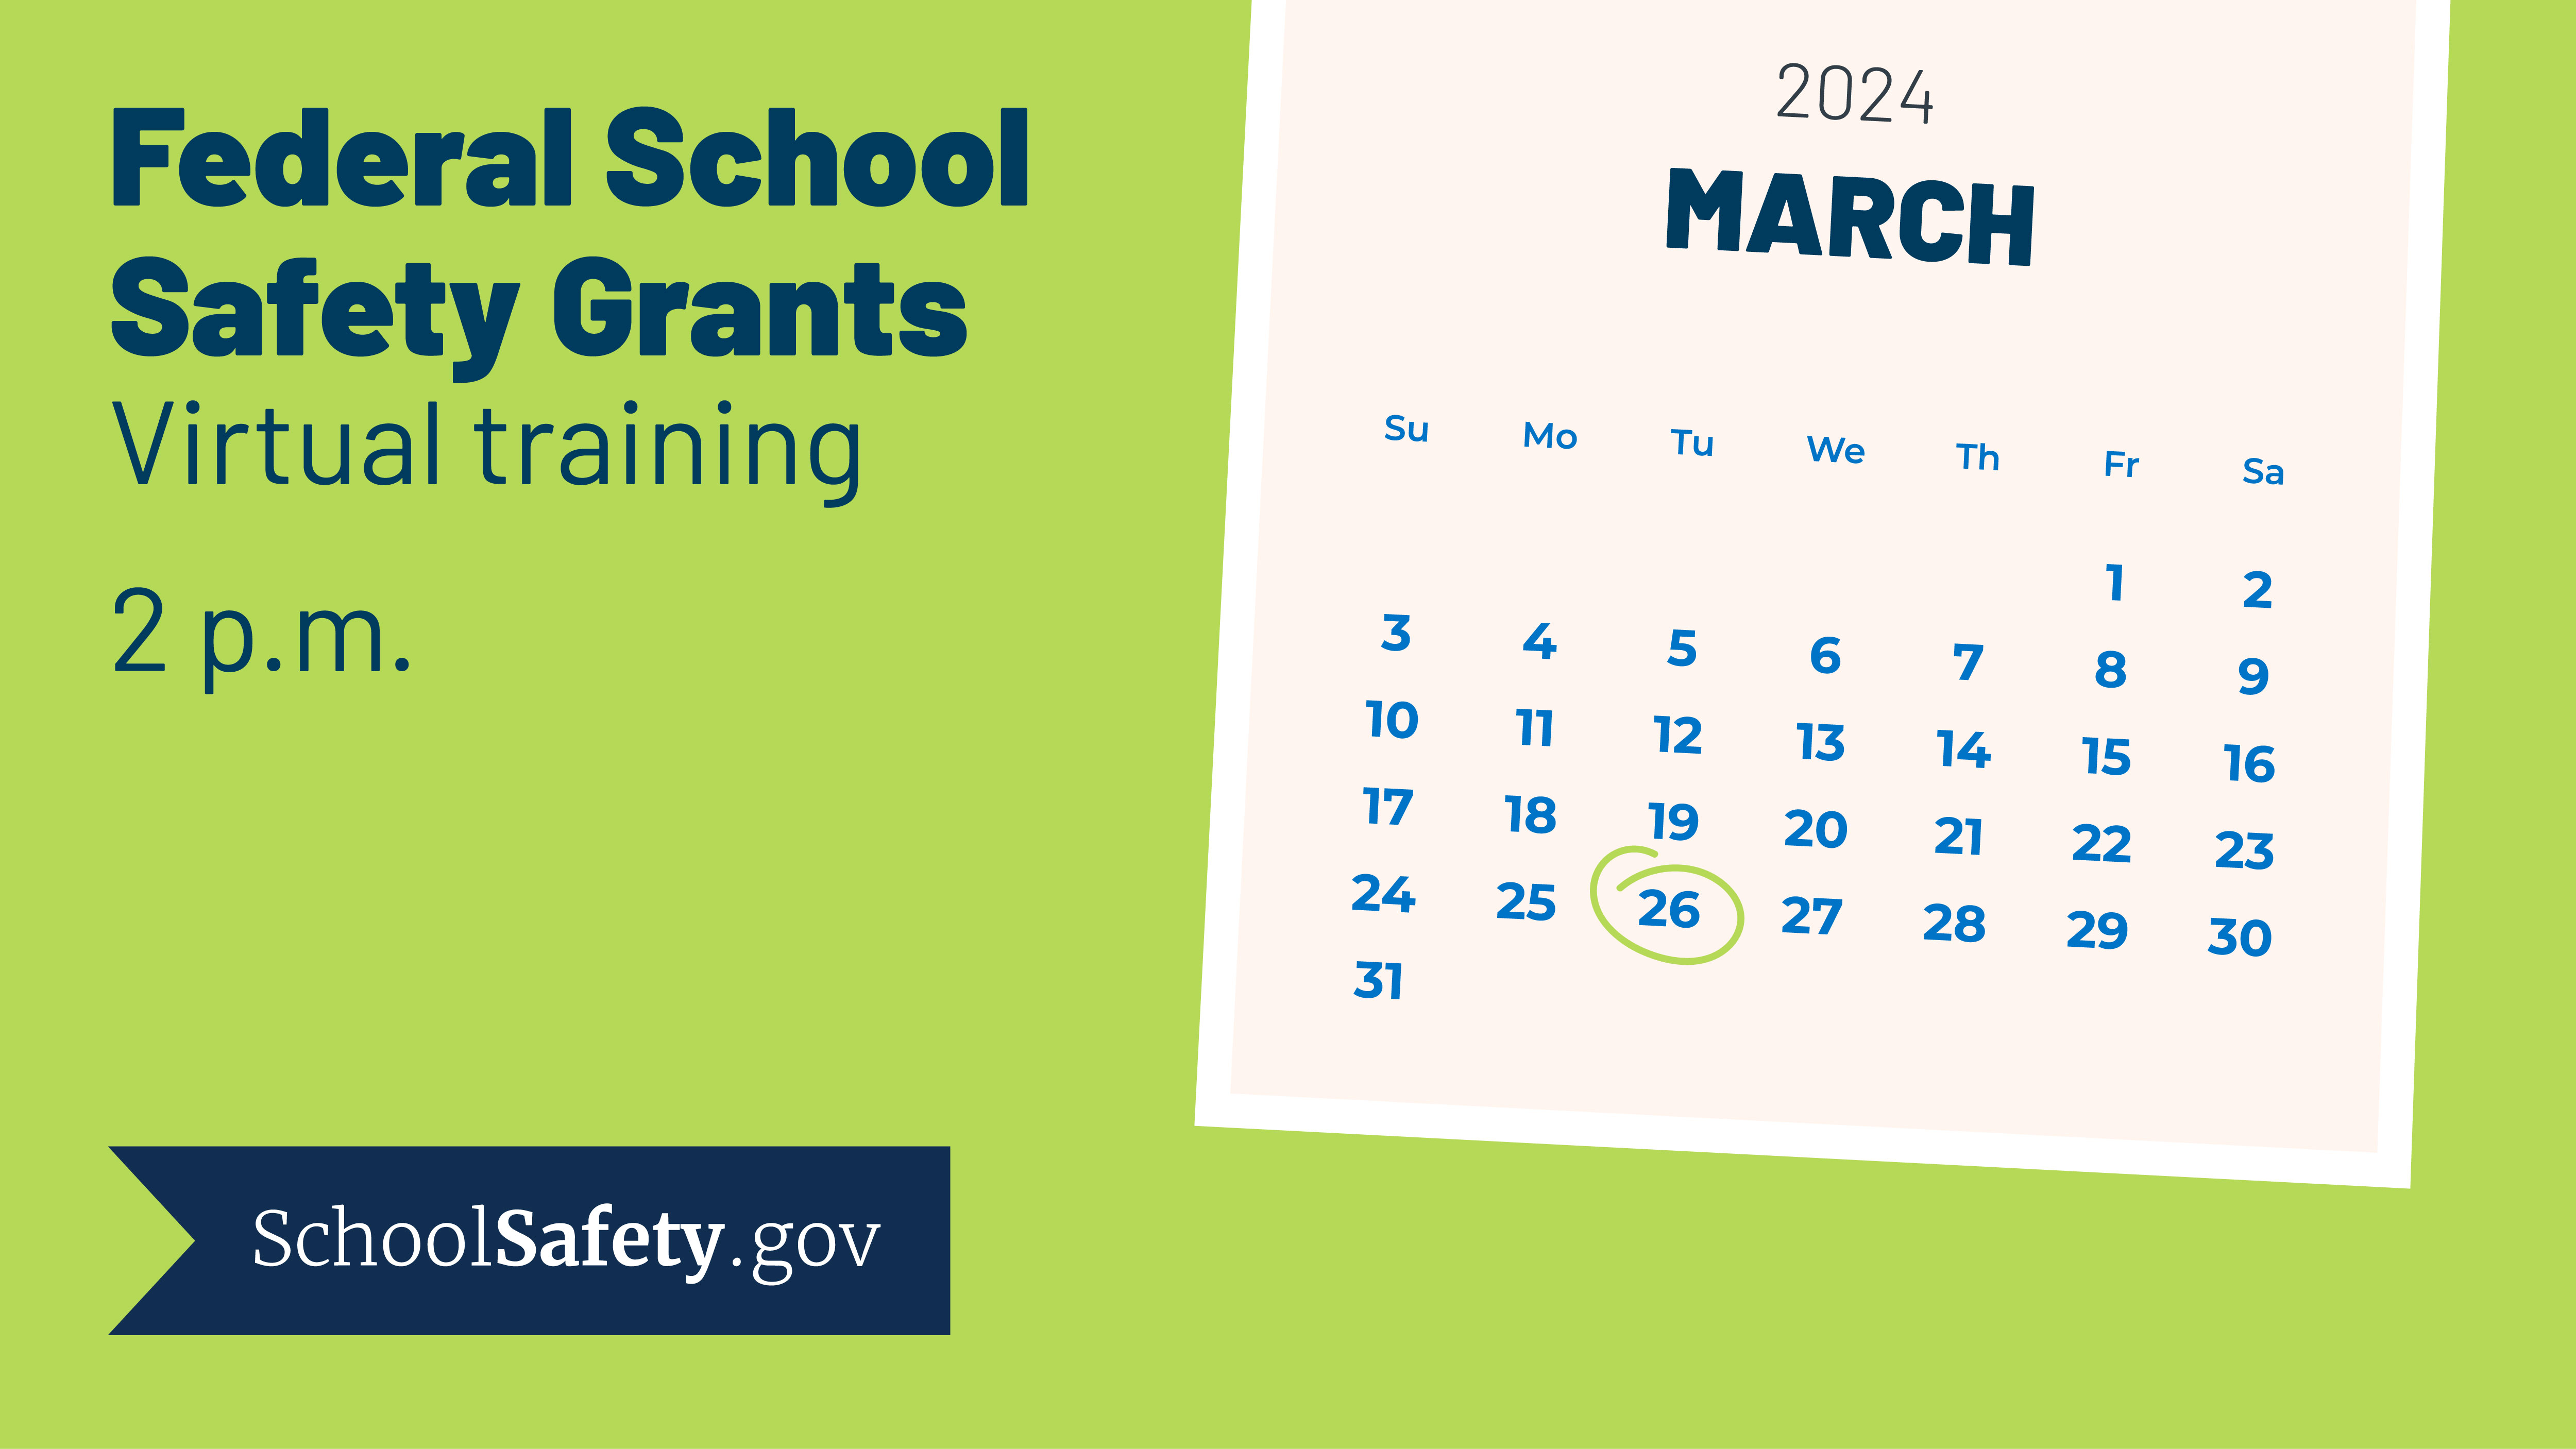 Federal school safety grants virtual training at 2pm on March 26. Calendar graphic and School Safety logo